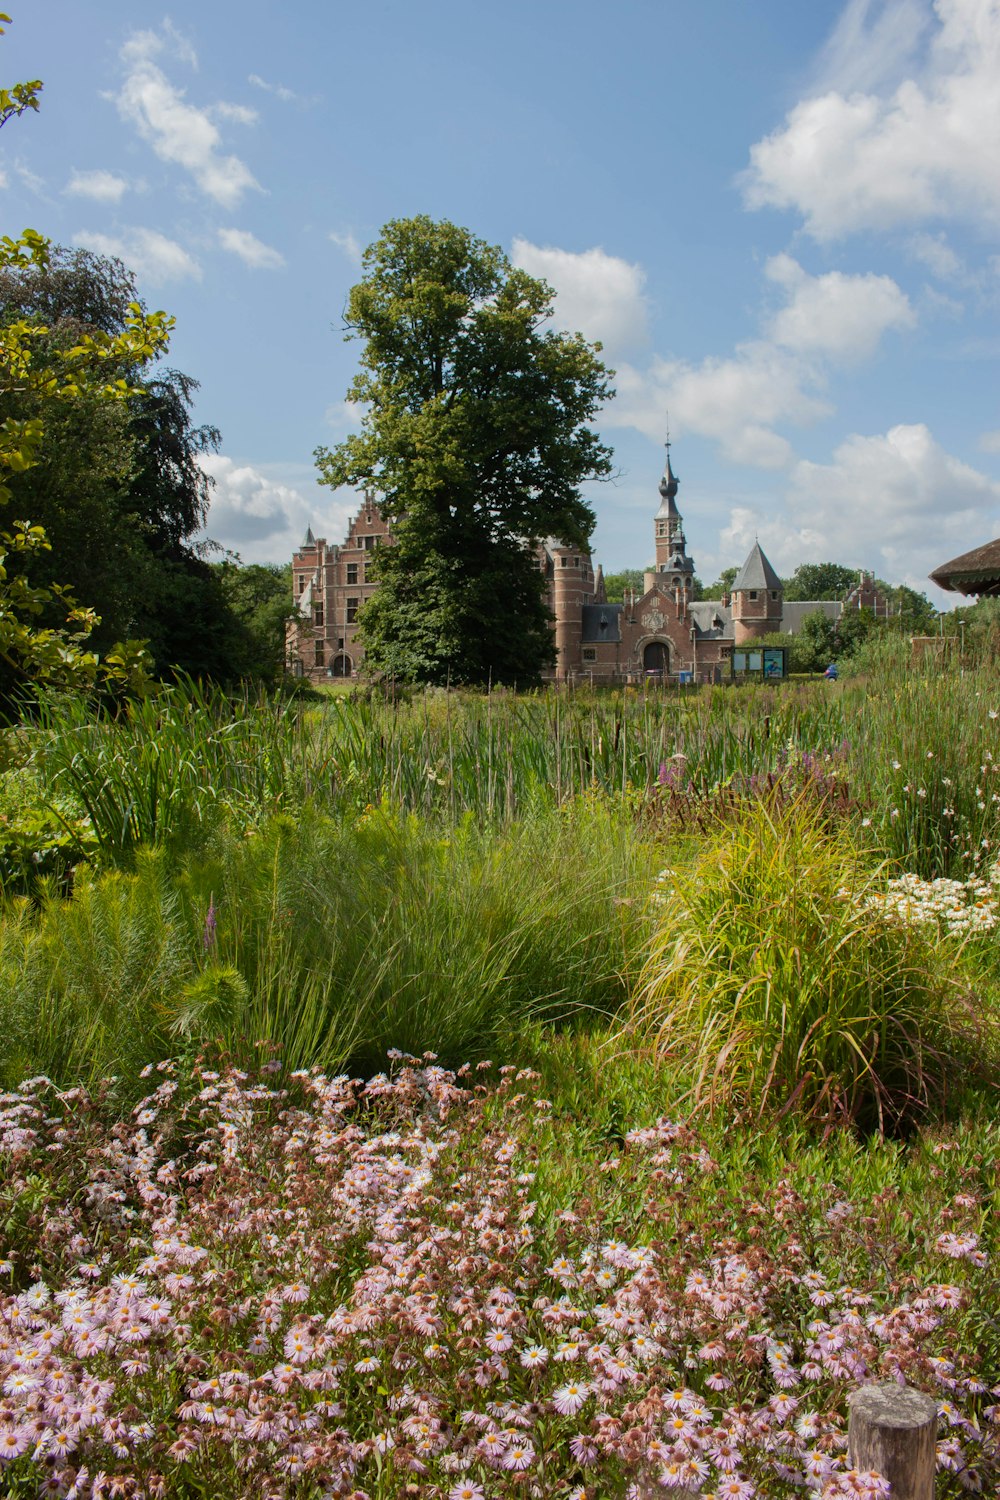 a field full of flowers and grass with a building in the background